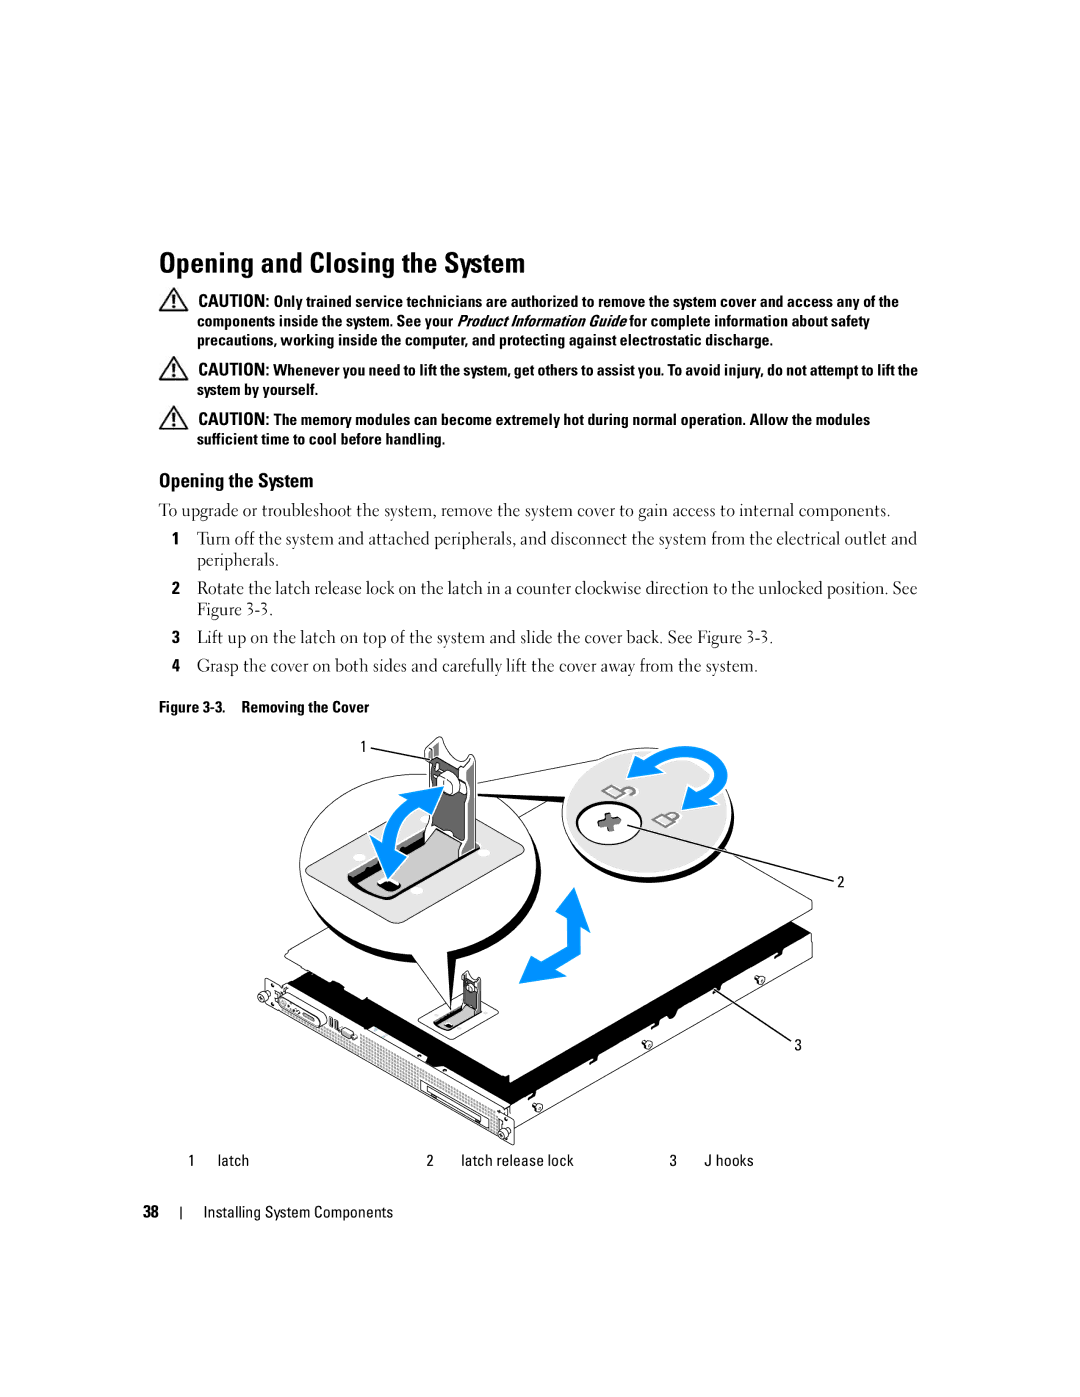 Dell SC1435 owner manual Opening and Closing the System, Opening the System 